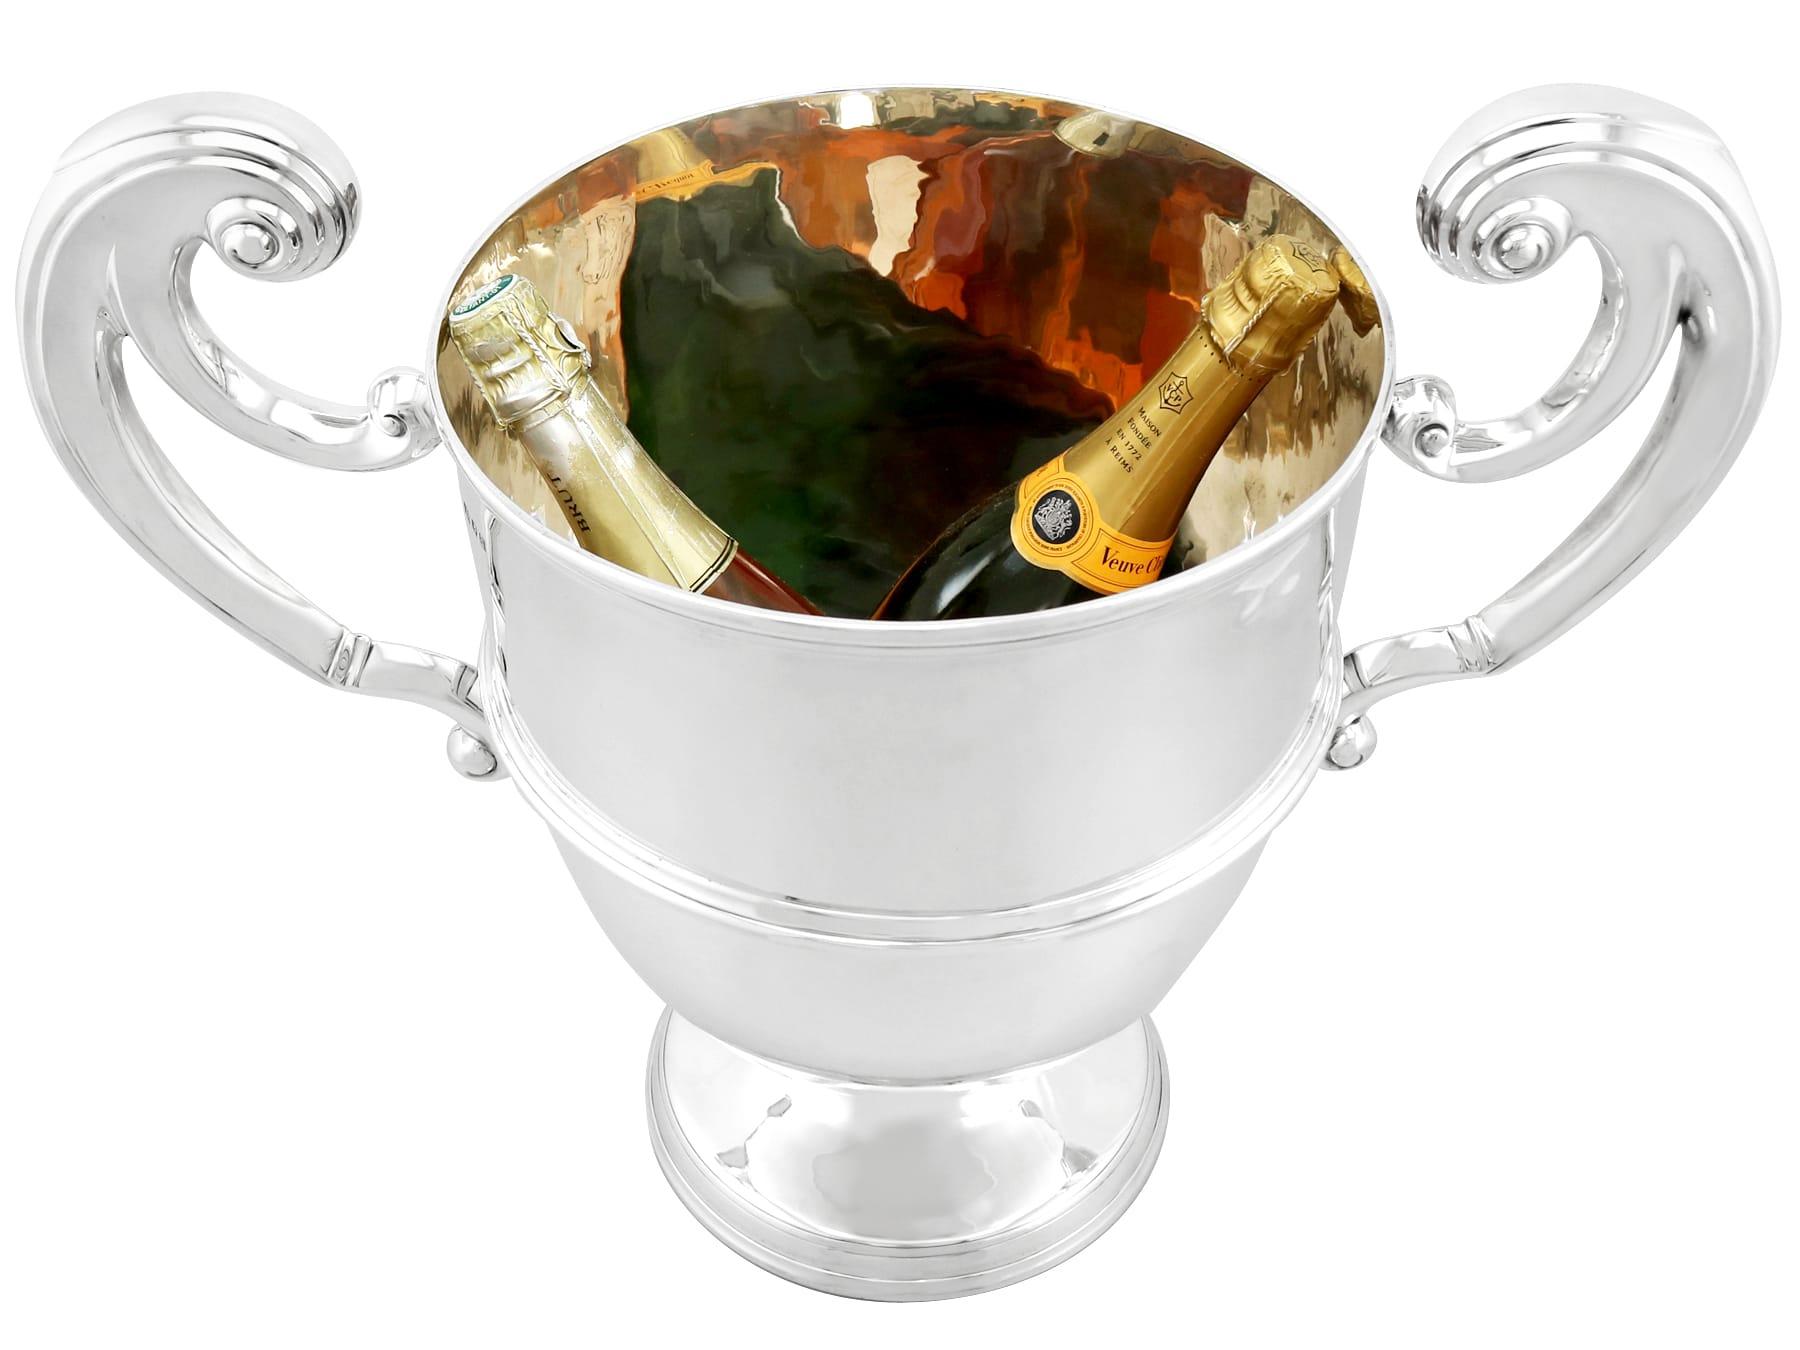 A magnificent, fine and impressive, large antique Victorian English sterling silver cup, an addition to Victorian silverware collection.

This magnificent antique Victorian sterling silver champagne cup has a plain bell shaped form to a circular